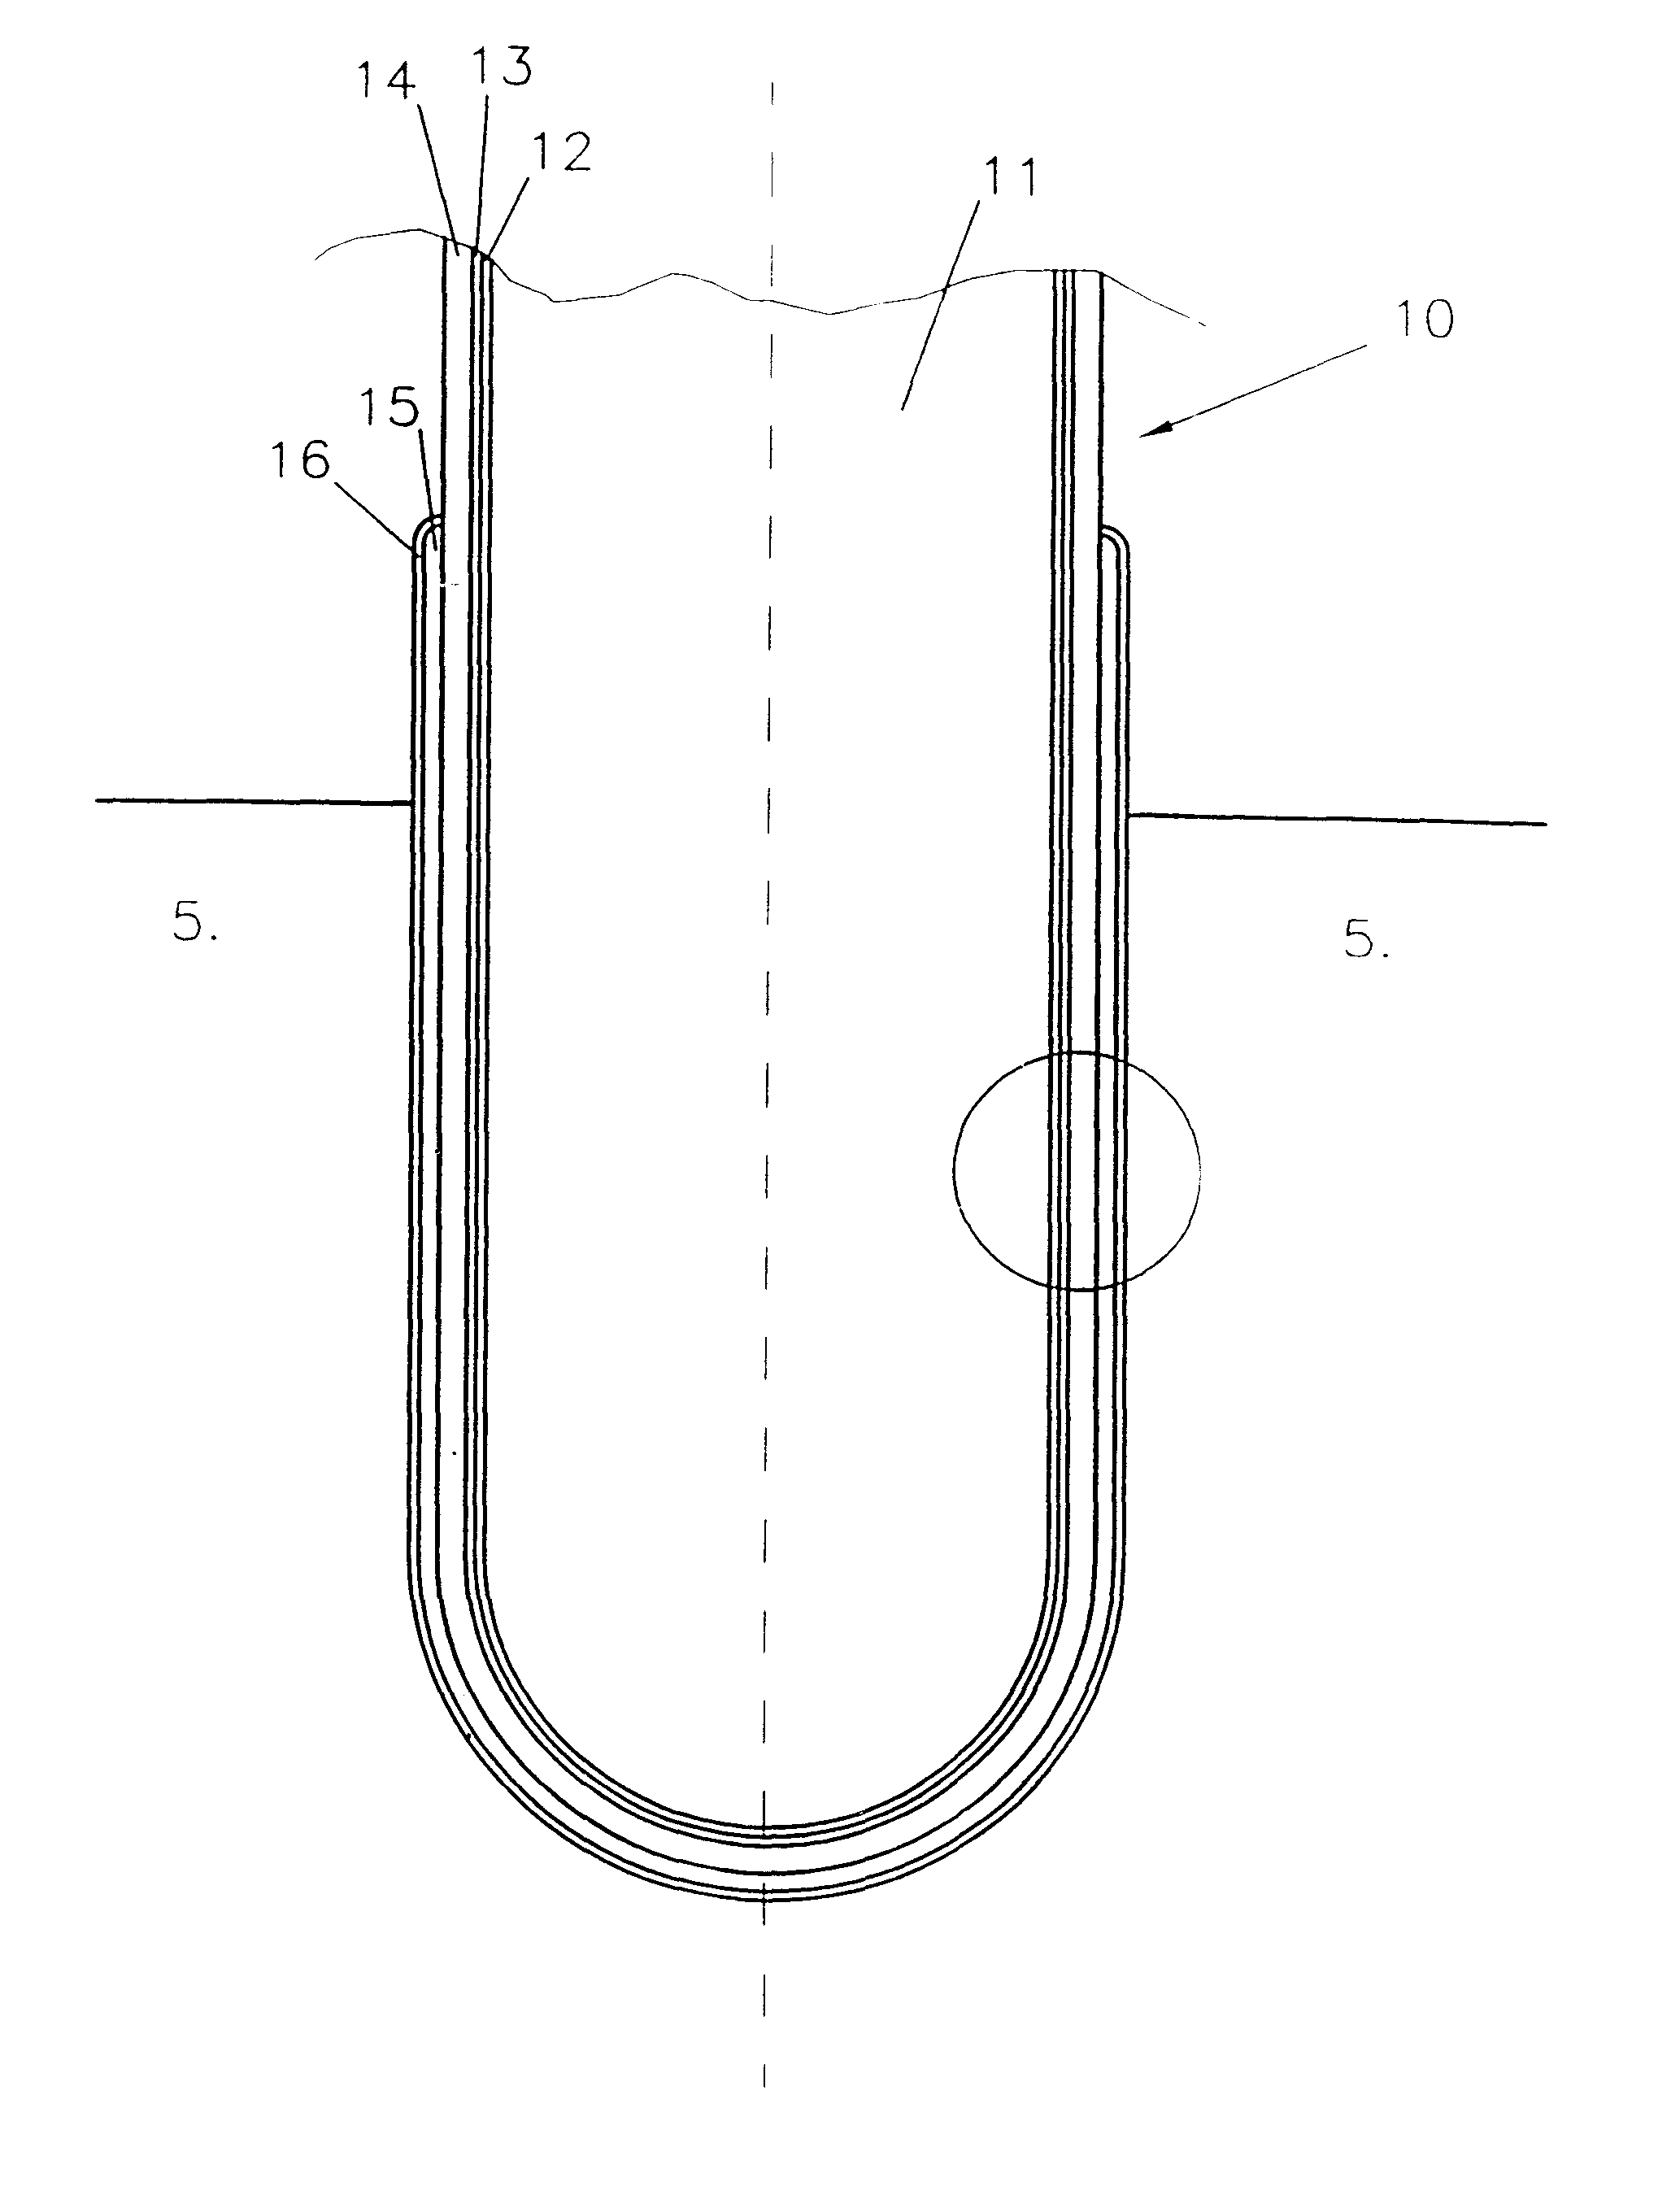 Cells for the electrowinning of aluminium having dimensionally stable metal-based anodes